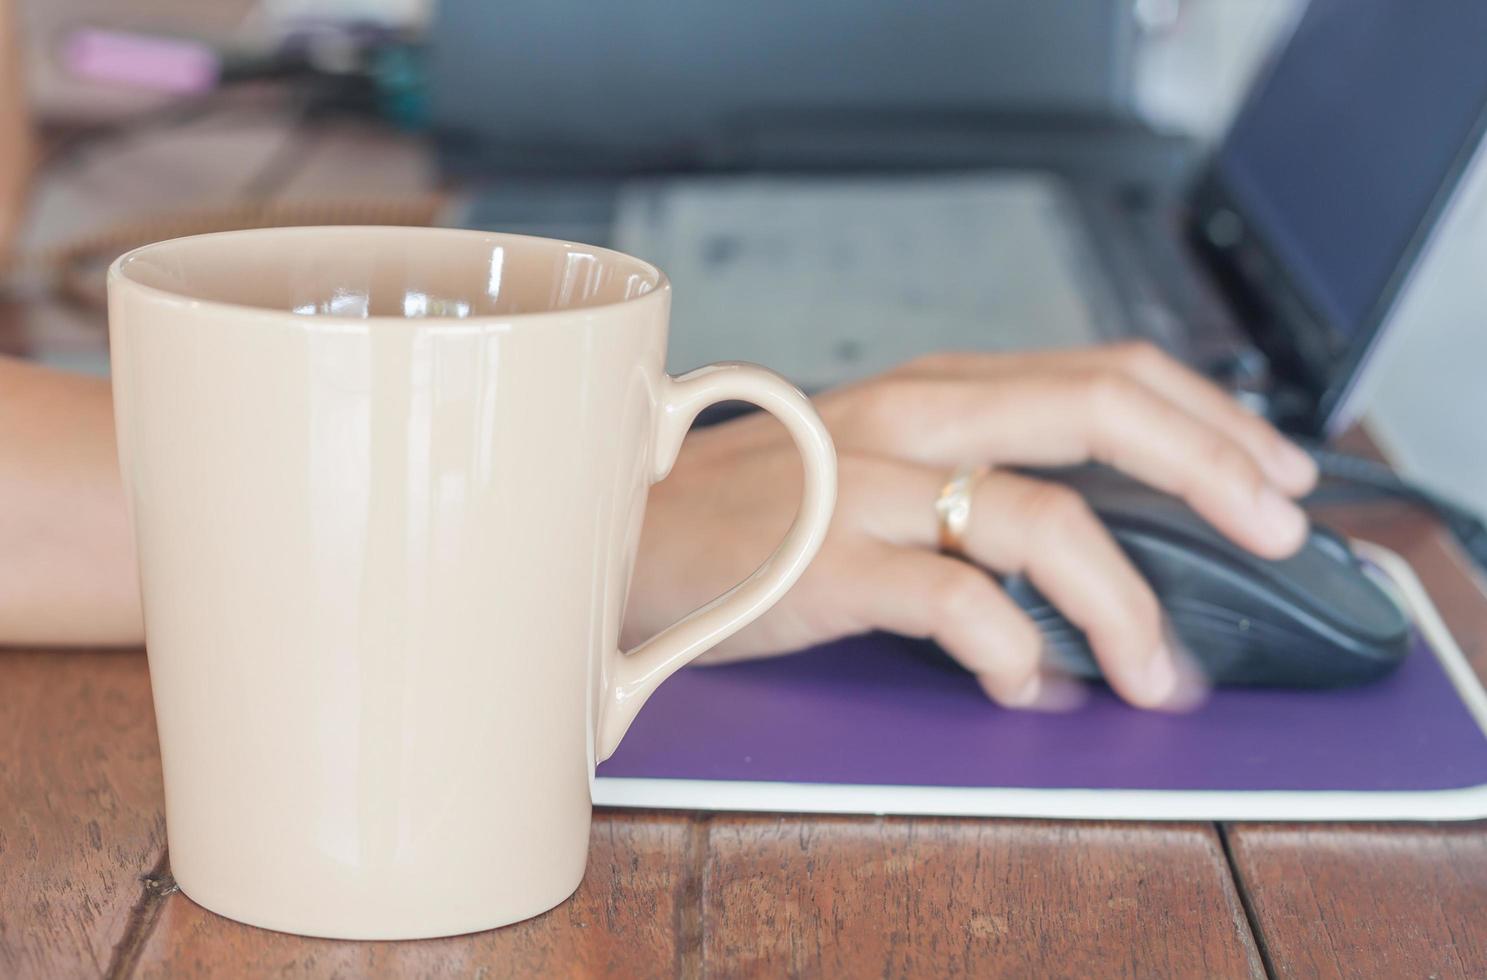 Coffee mug in front of a person working on a laptop photo